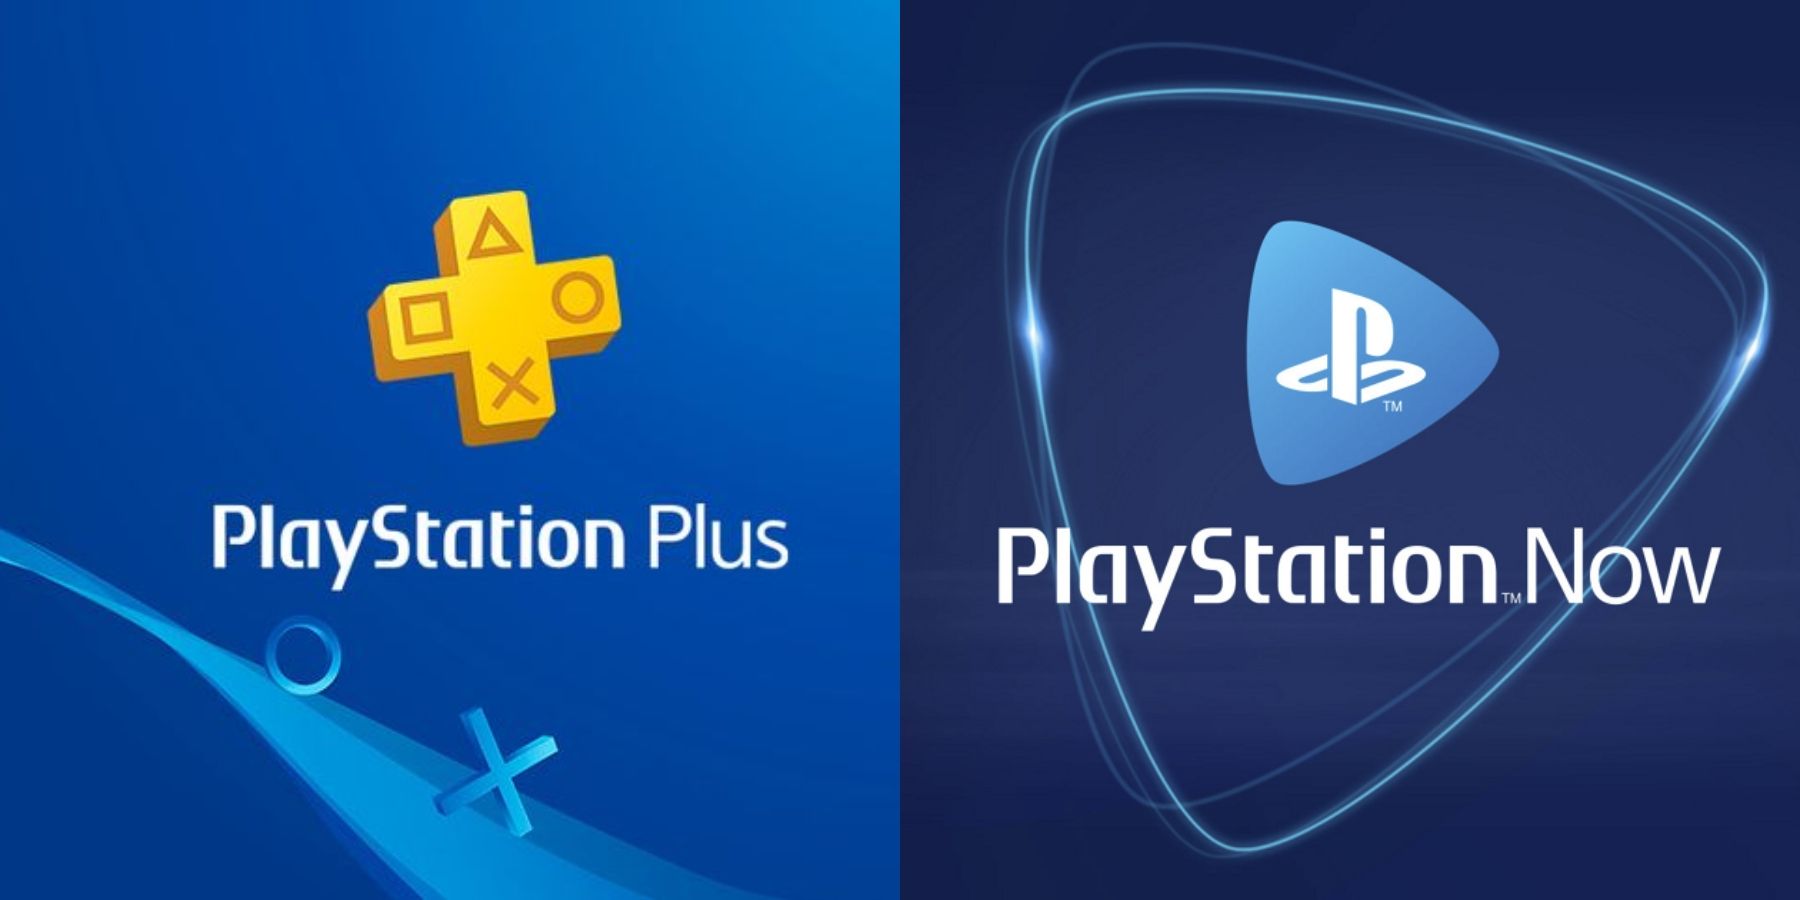 PlayStation Now Subscribers Can Upgrade to PS Plus Premium for Free